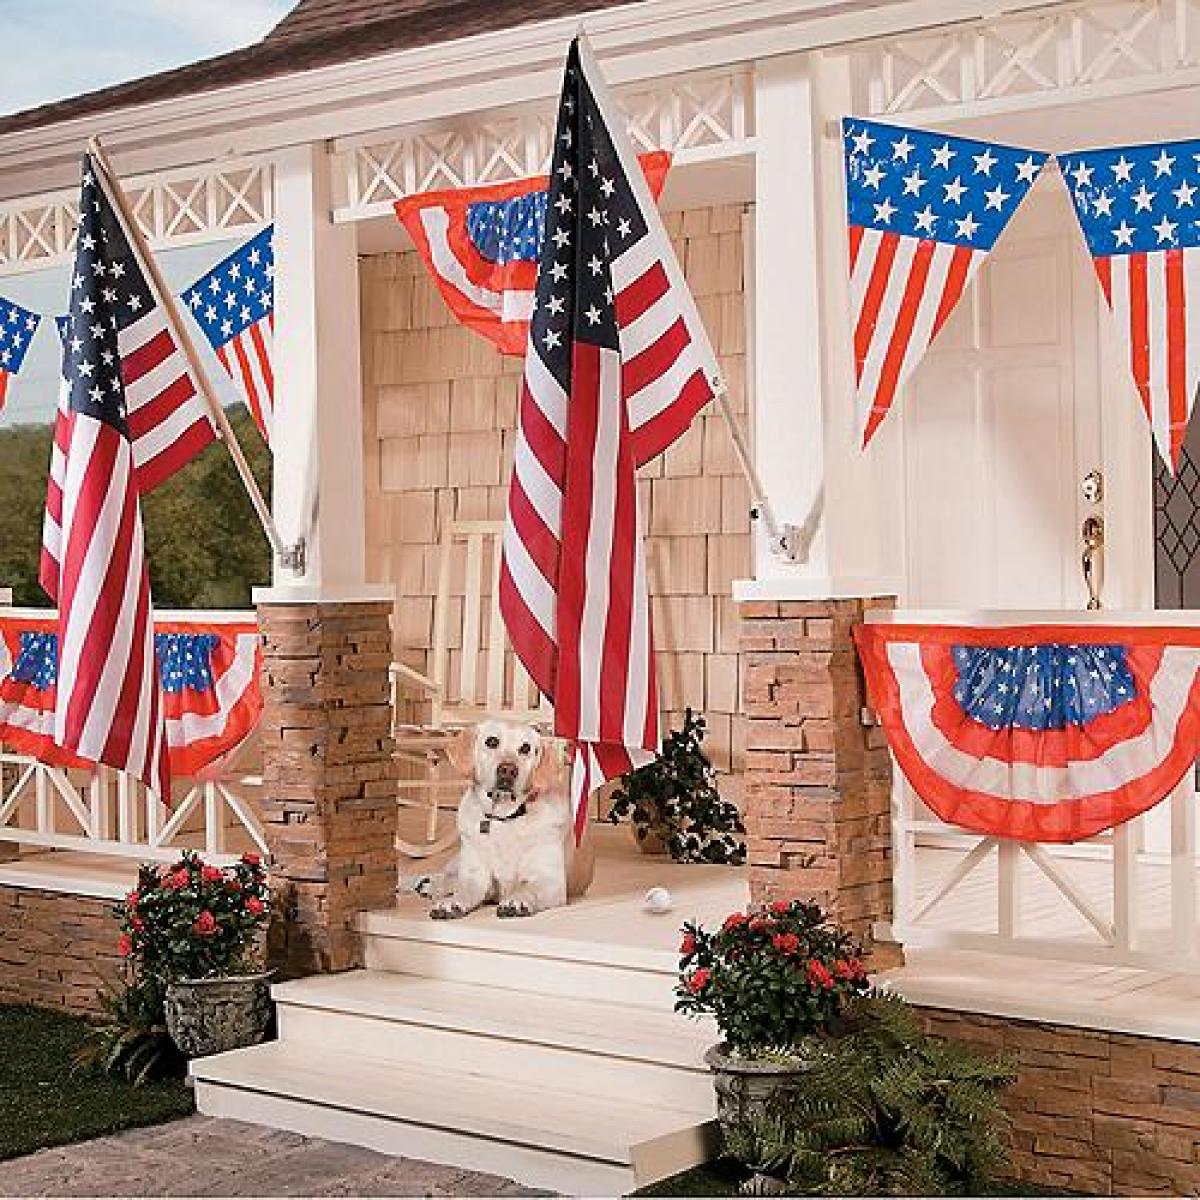 Red, white, and blue 4th of july home decorations to celebrate in style